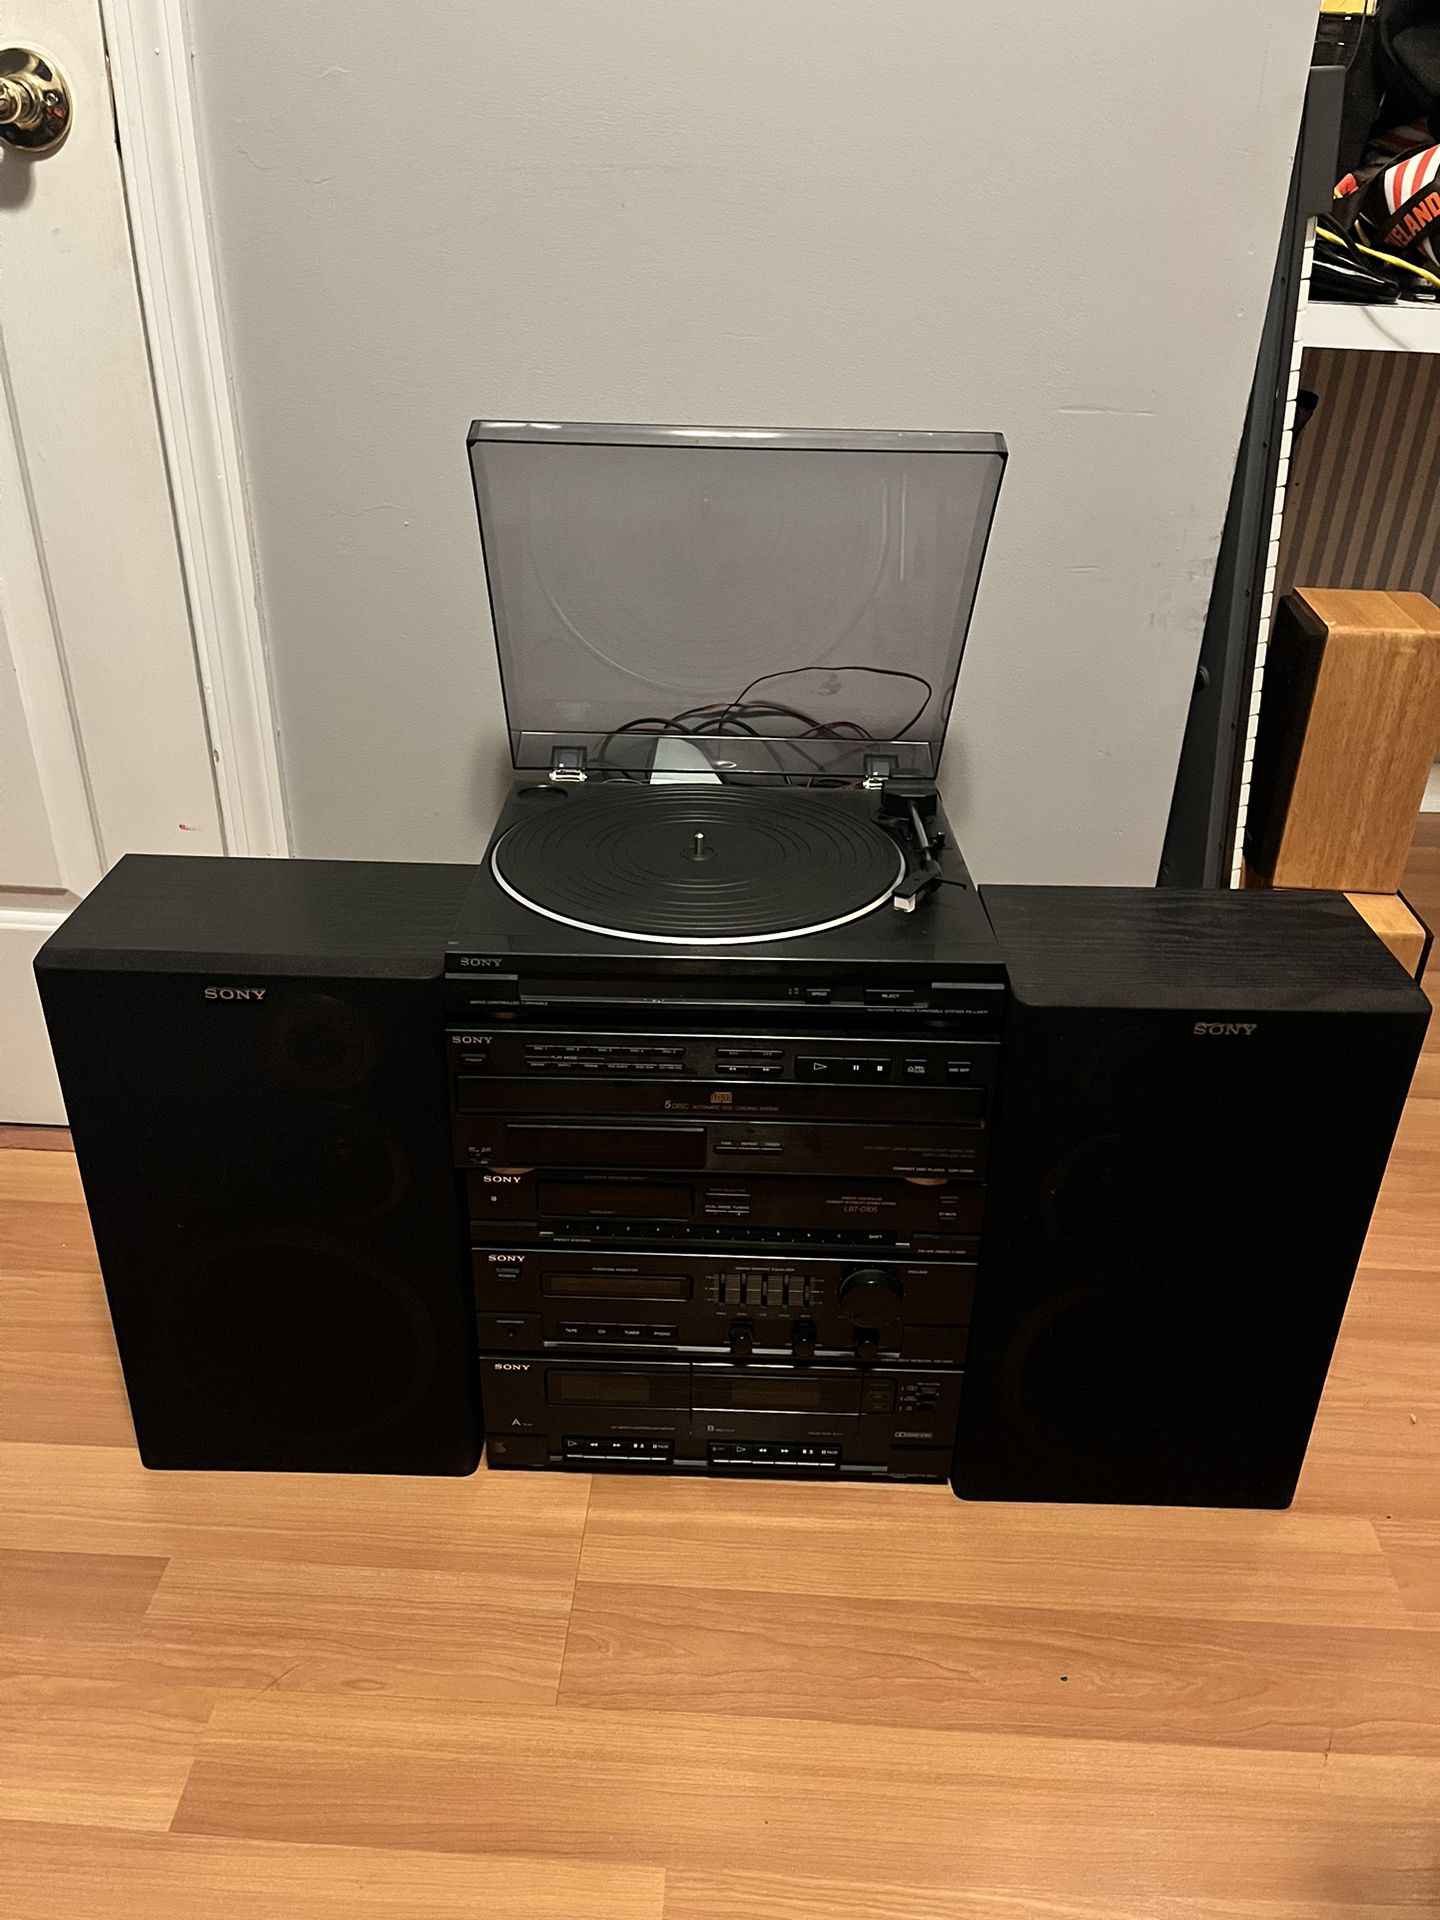 Sony Stereo System With Record Player, CD Player, Tape Deck